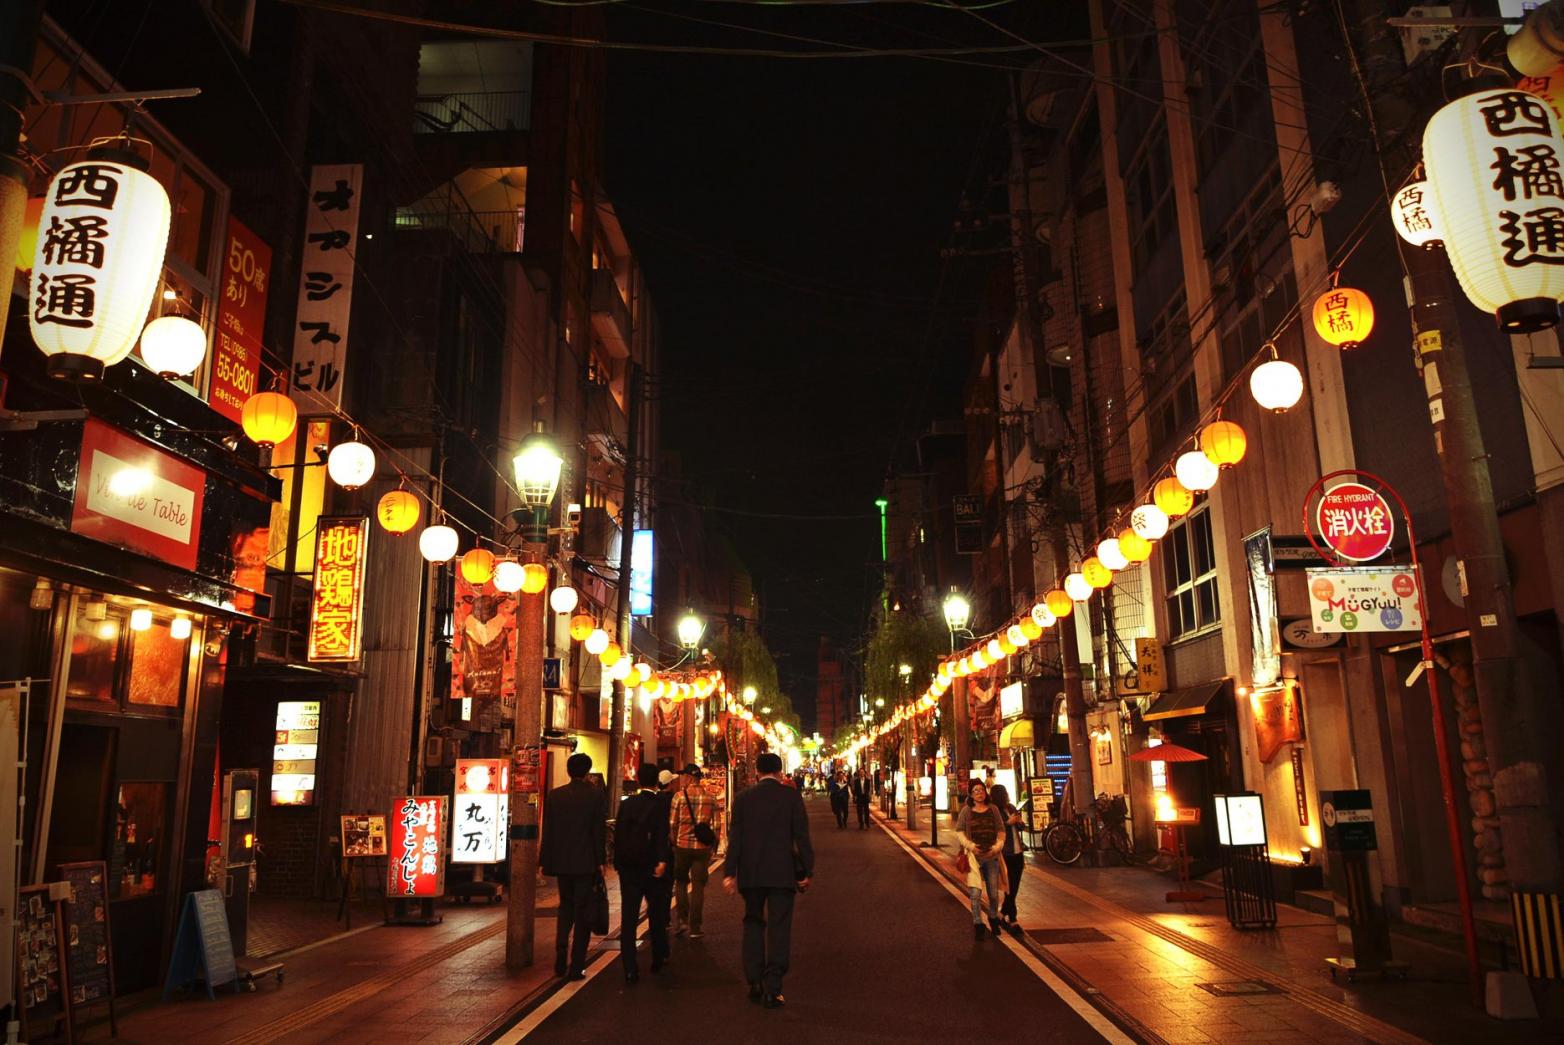 Nishitachi: An Entertainment District That Will Give You A Fulfilling Evening